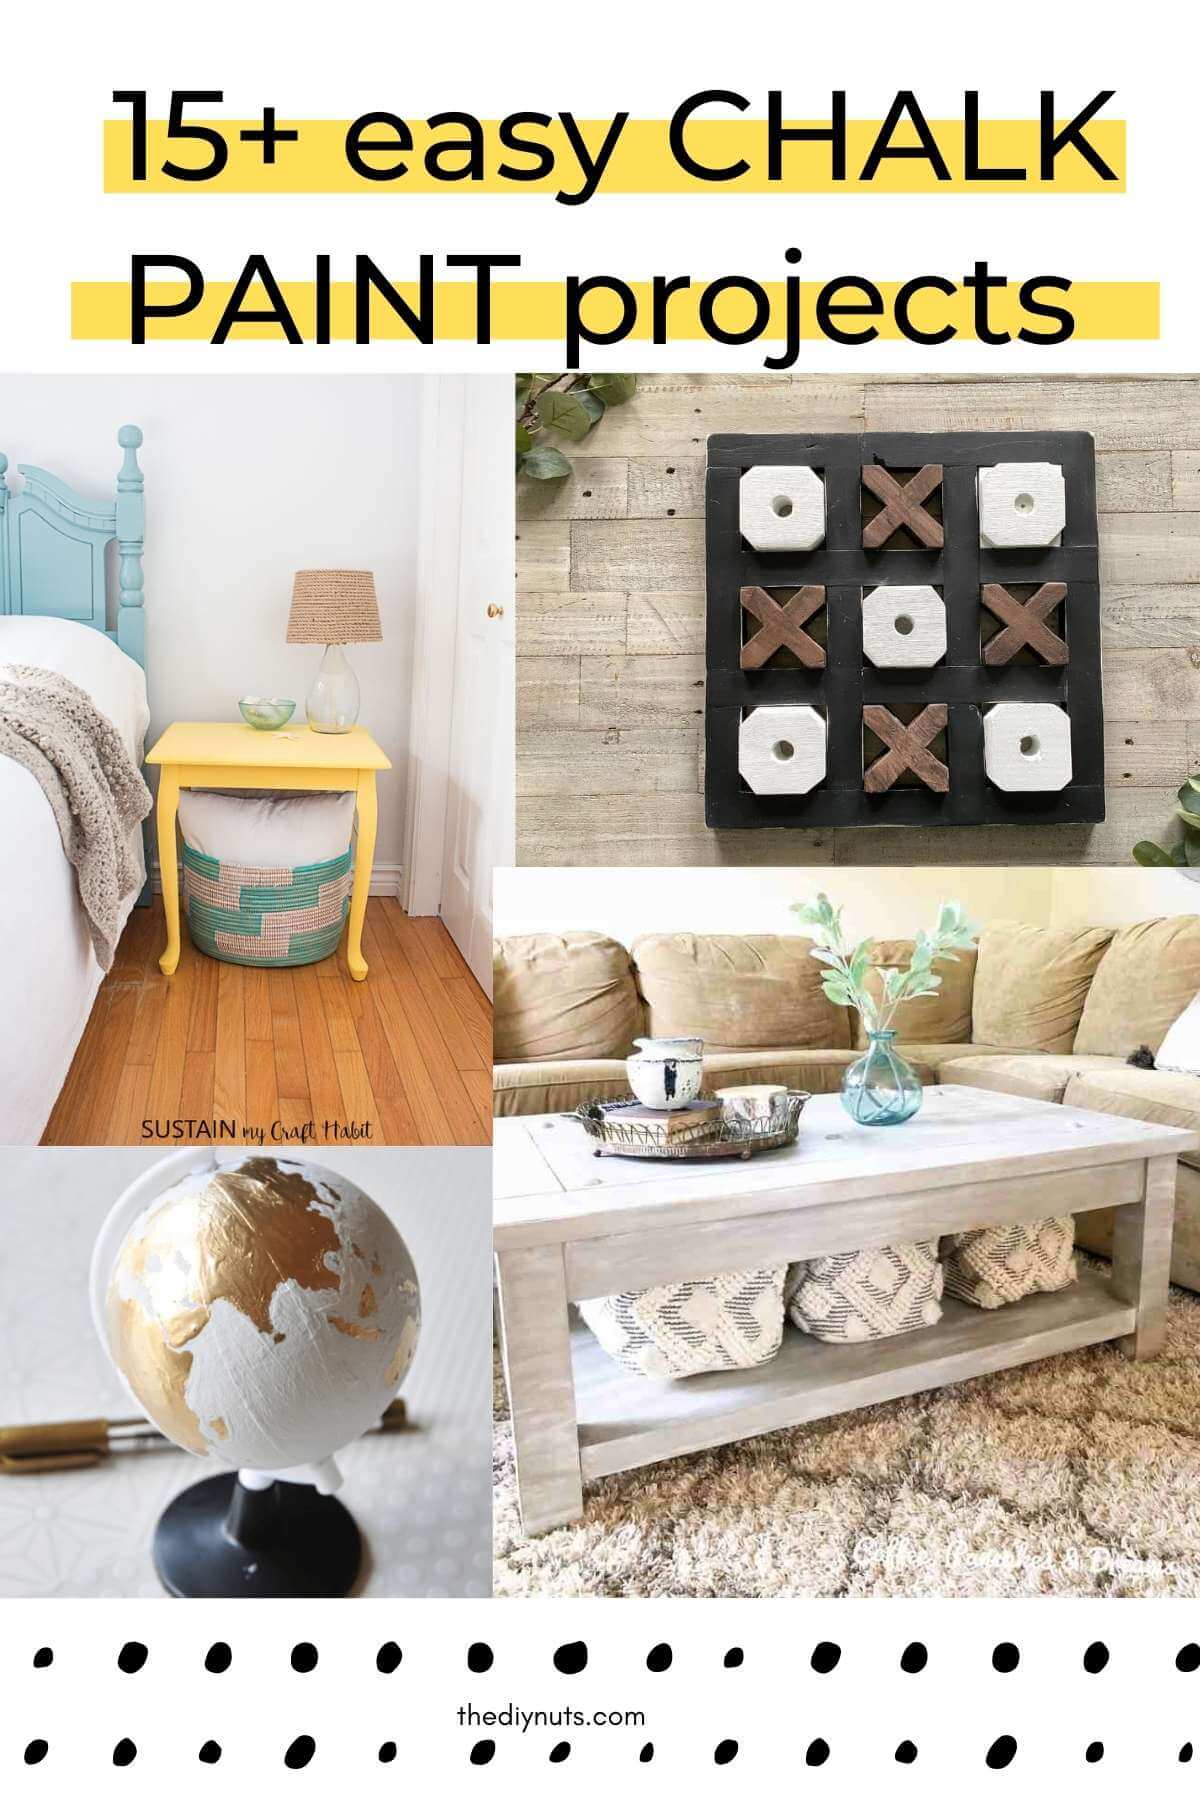 15+ easy chalk paint projects with 4 different images of DIY ideas.